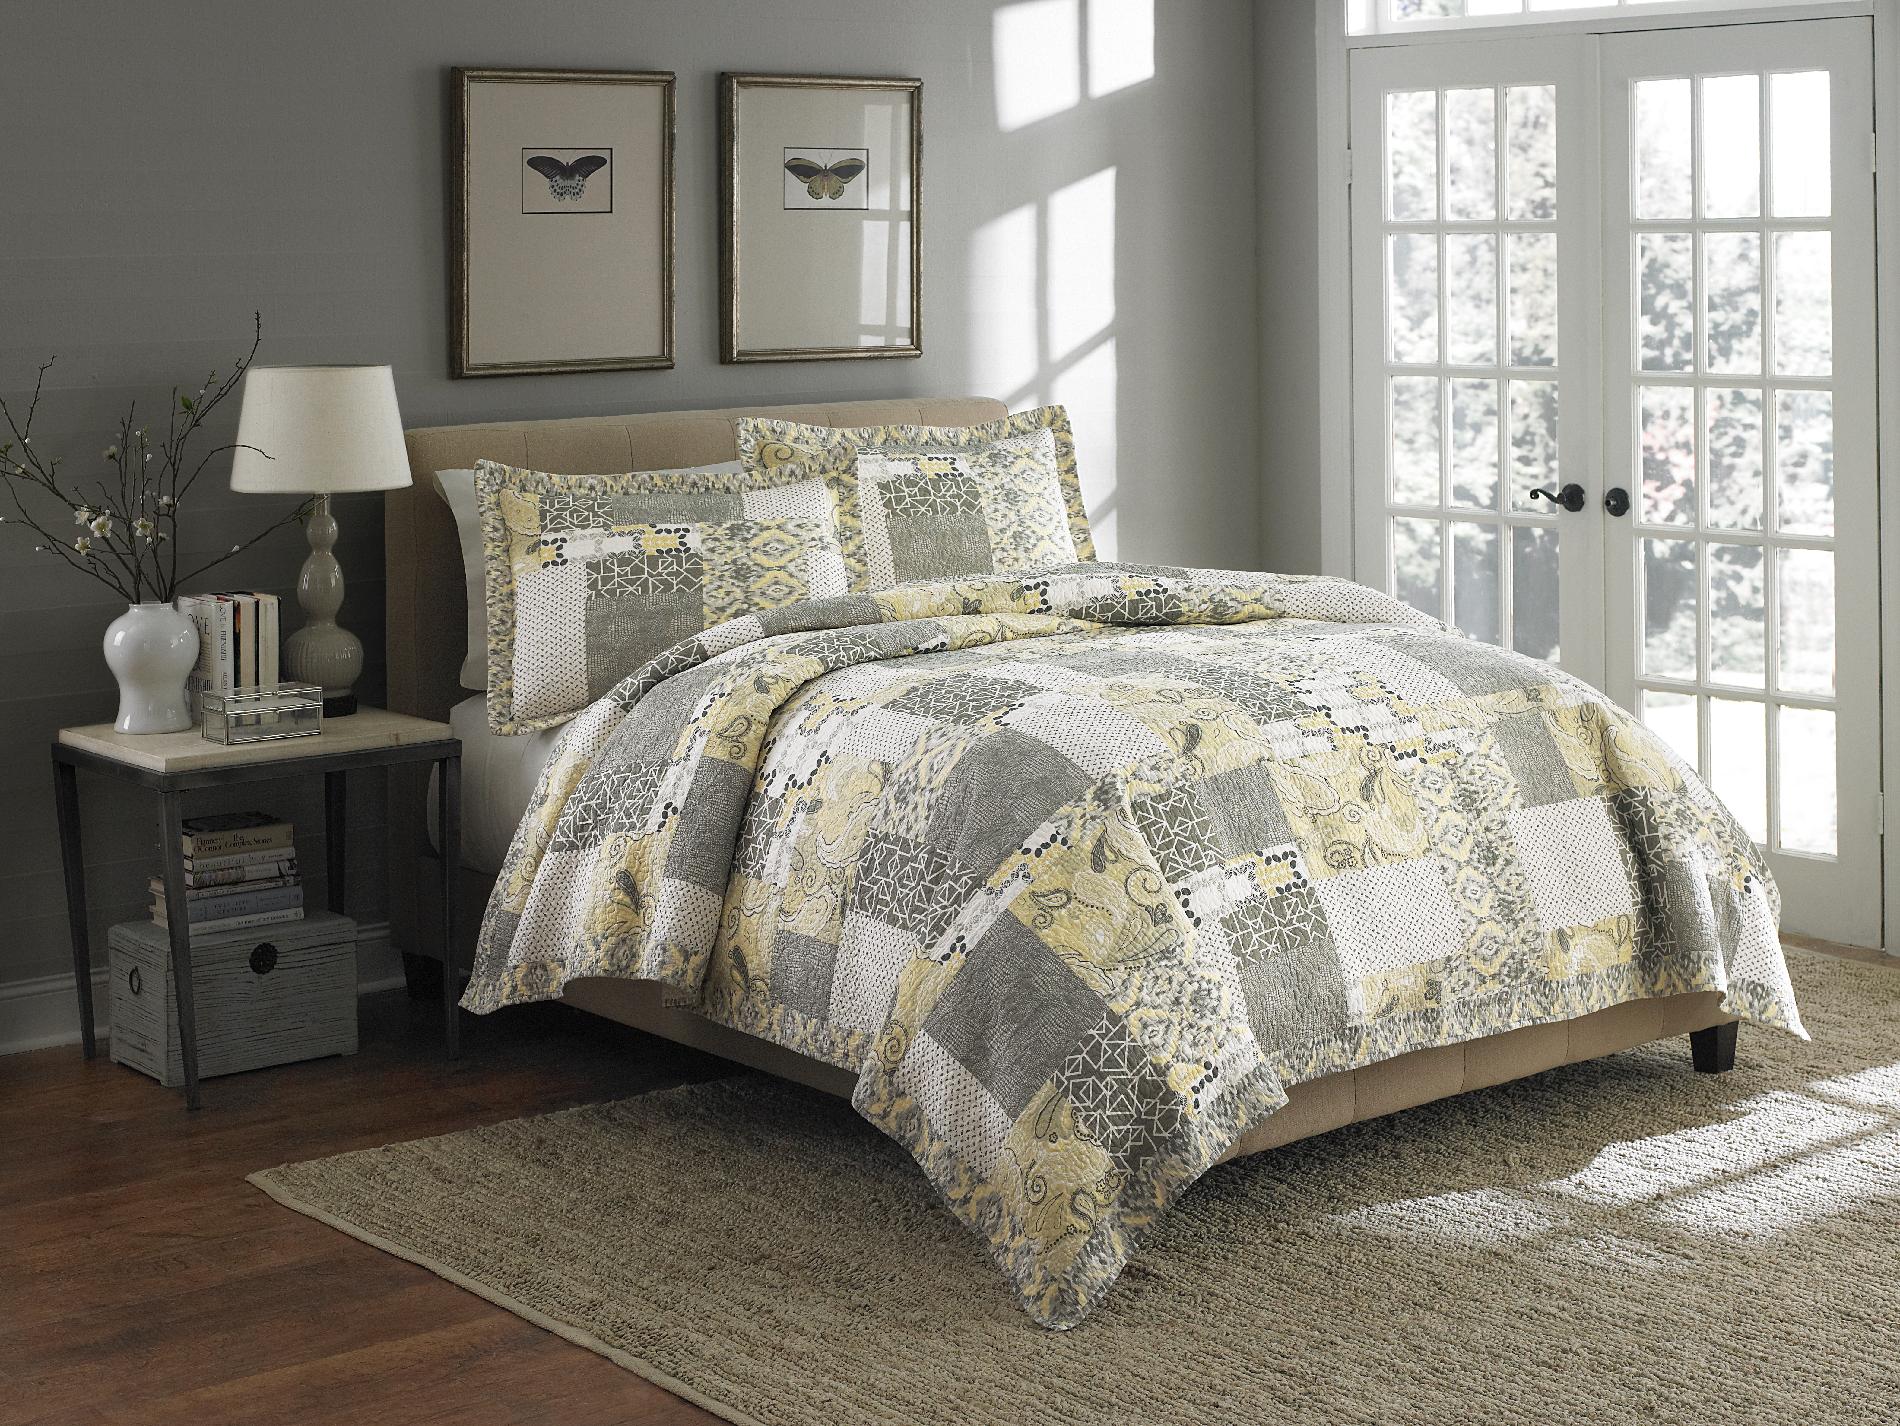 Cannon Bedford Heights Quilt Set